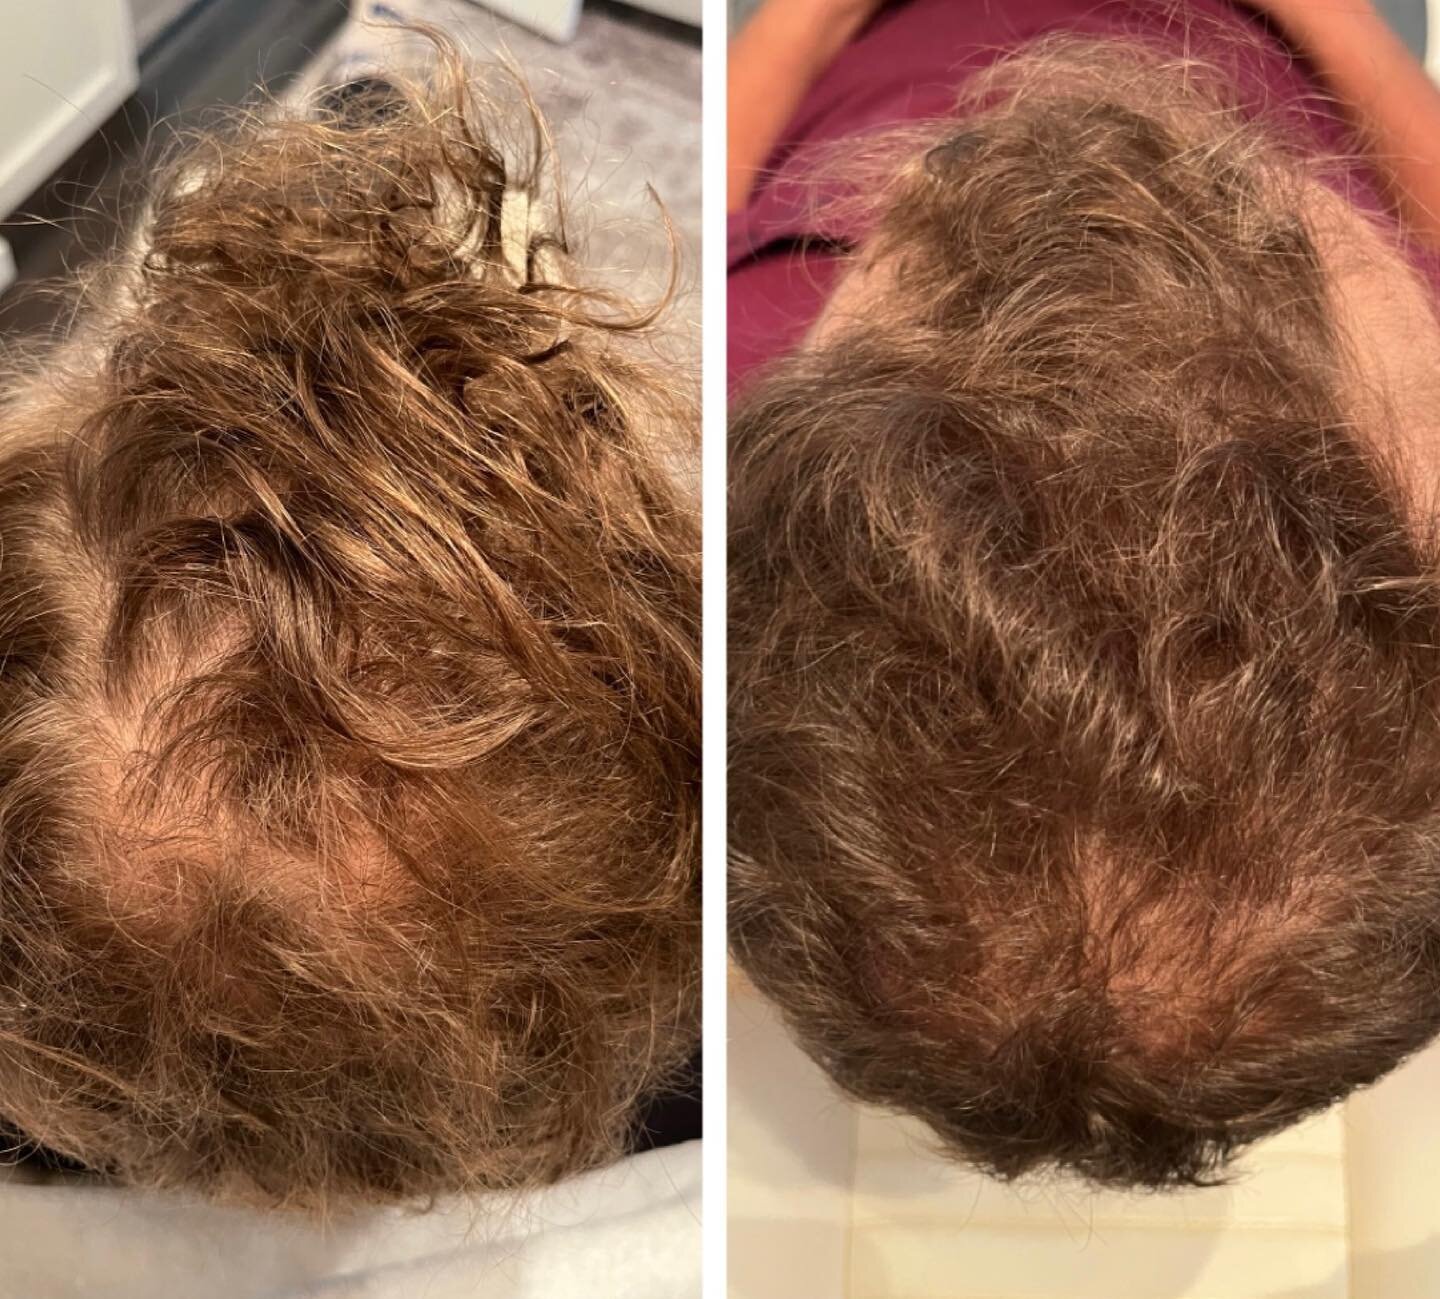 We are one of a small handful of professionals offering exosomes for face and scalp rejuvenation. Exosomes are 3x more powerful and effective than using PRP or standard stem cells at producing growth factors. Our Hair Restoration Treatment combines c